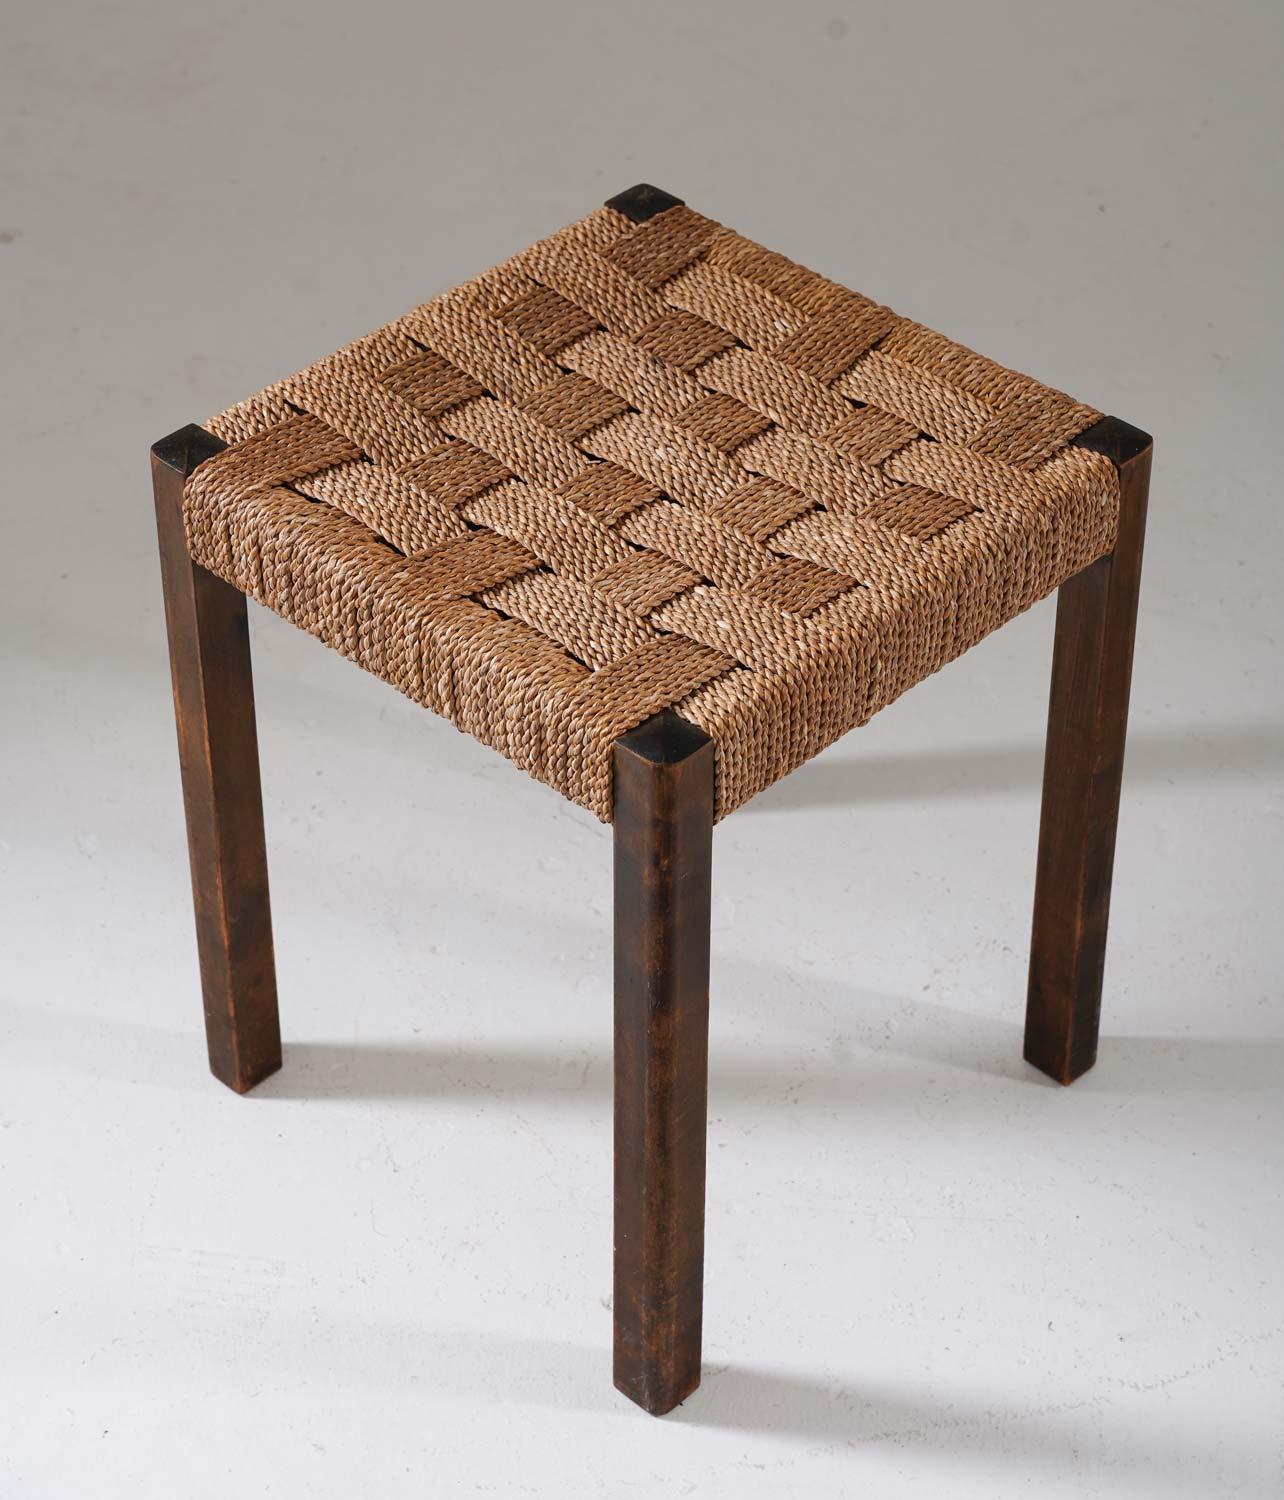 This Swedish modern stool designed by Axel Larsson for Bodafors in the 1930s offers a distinctive blend of craftsmanship and historical allure. Constructed from stained birch and featuring seagrass webbing, these stools epitomise the design